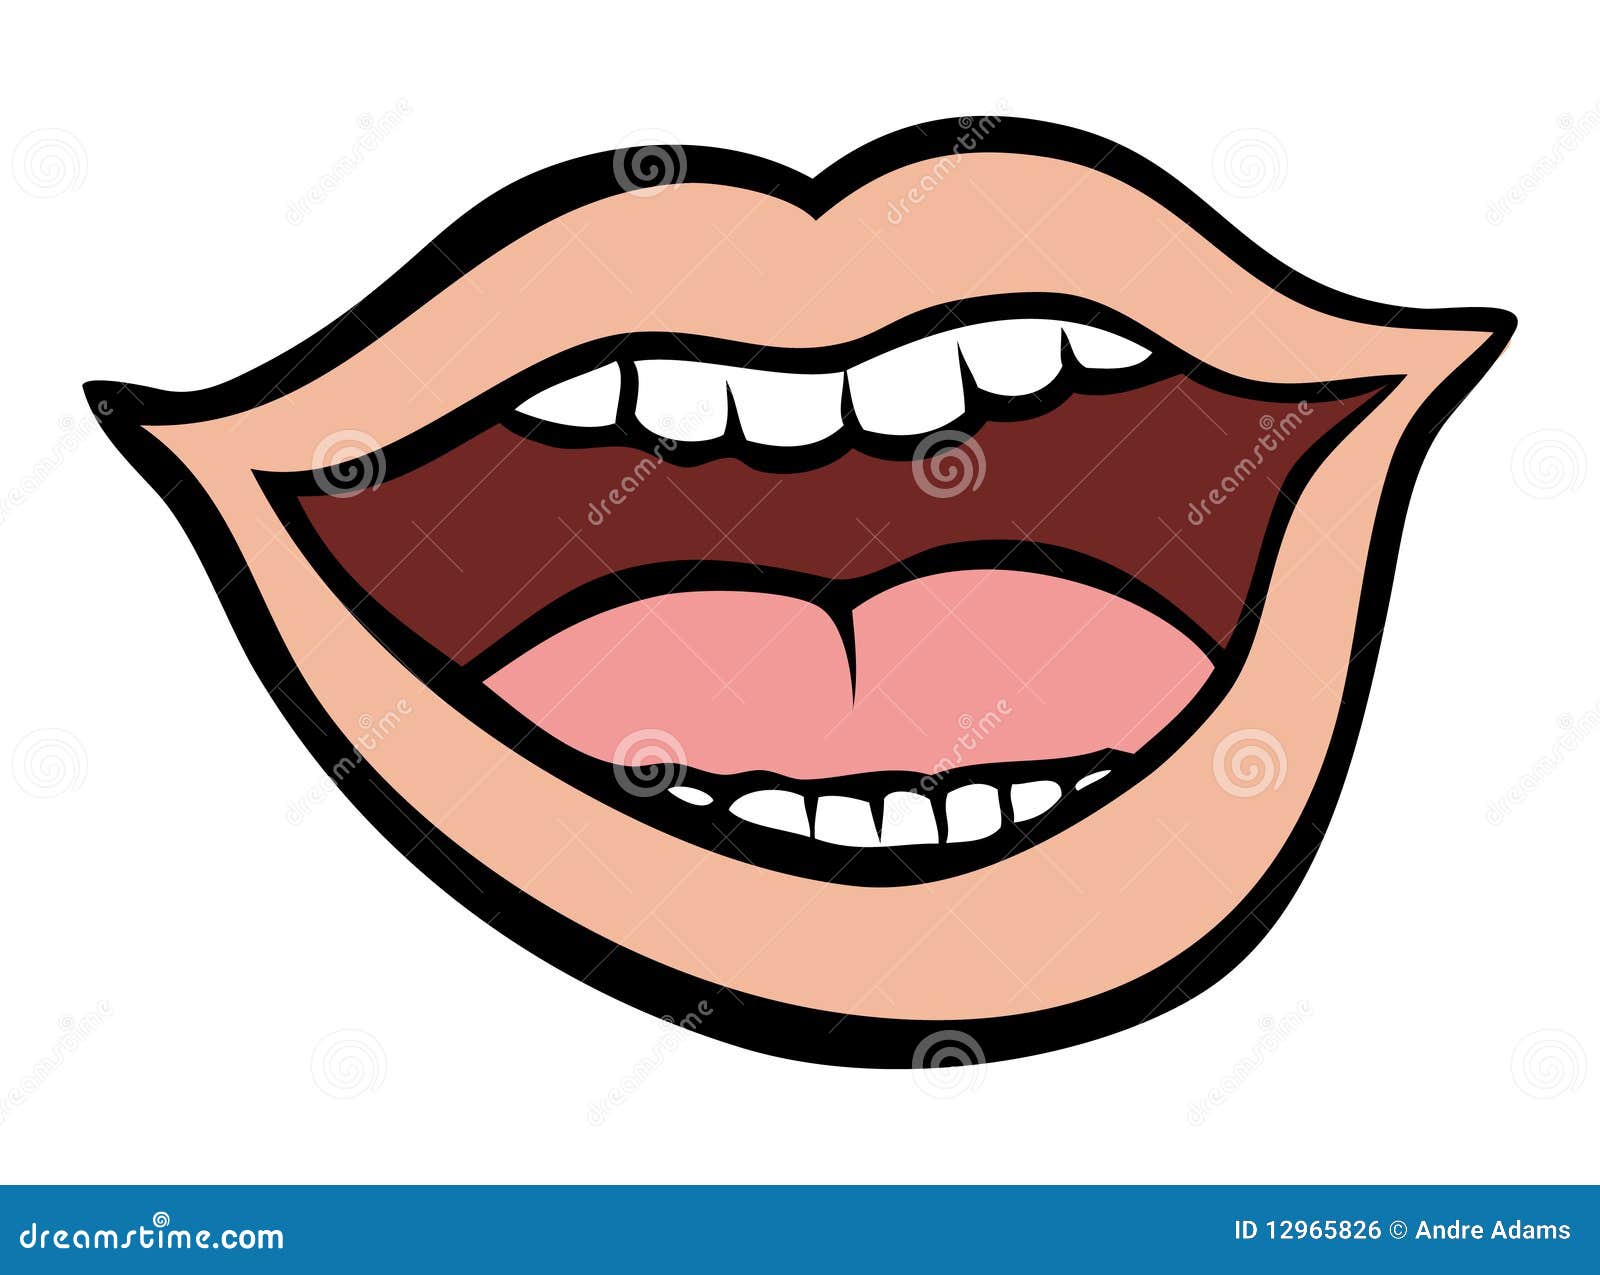 word of mouth clipart - photo #35